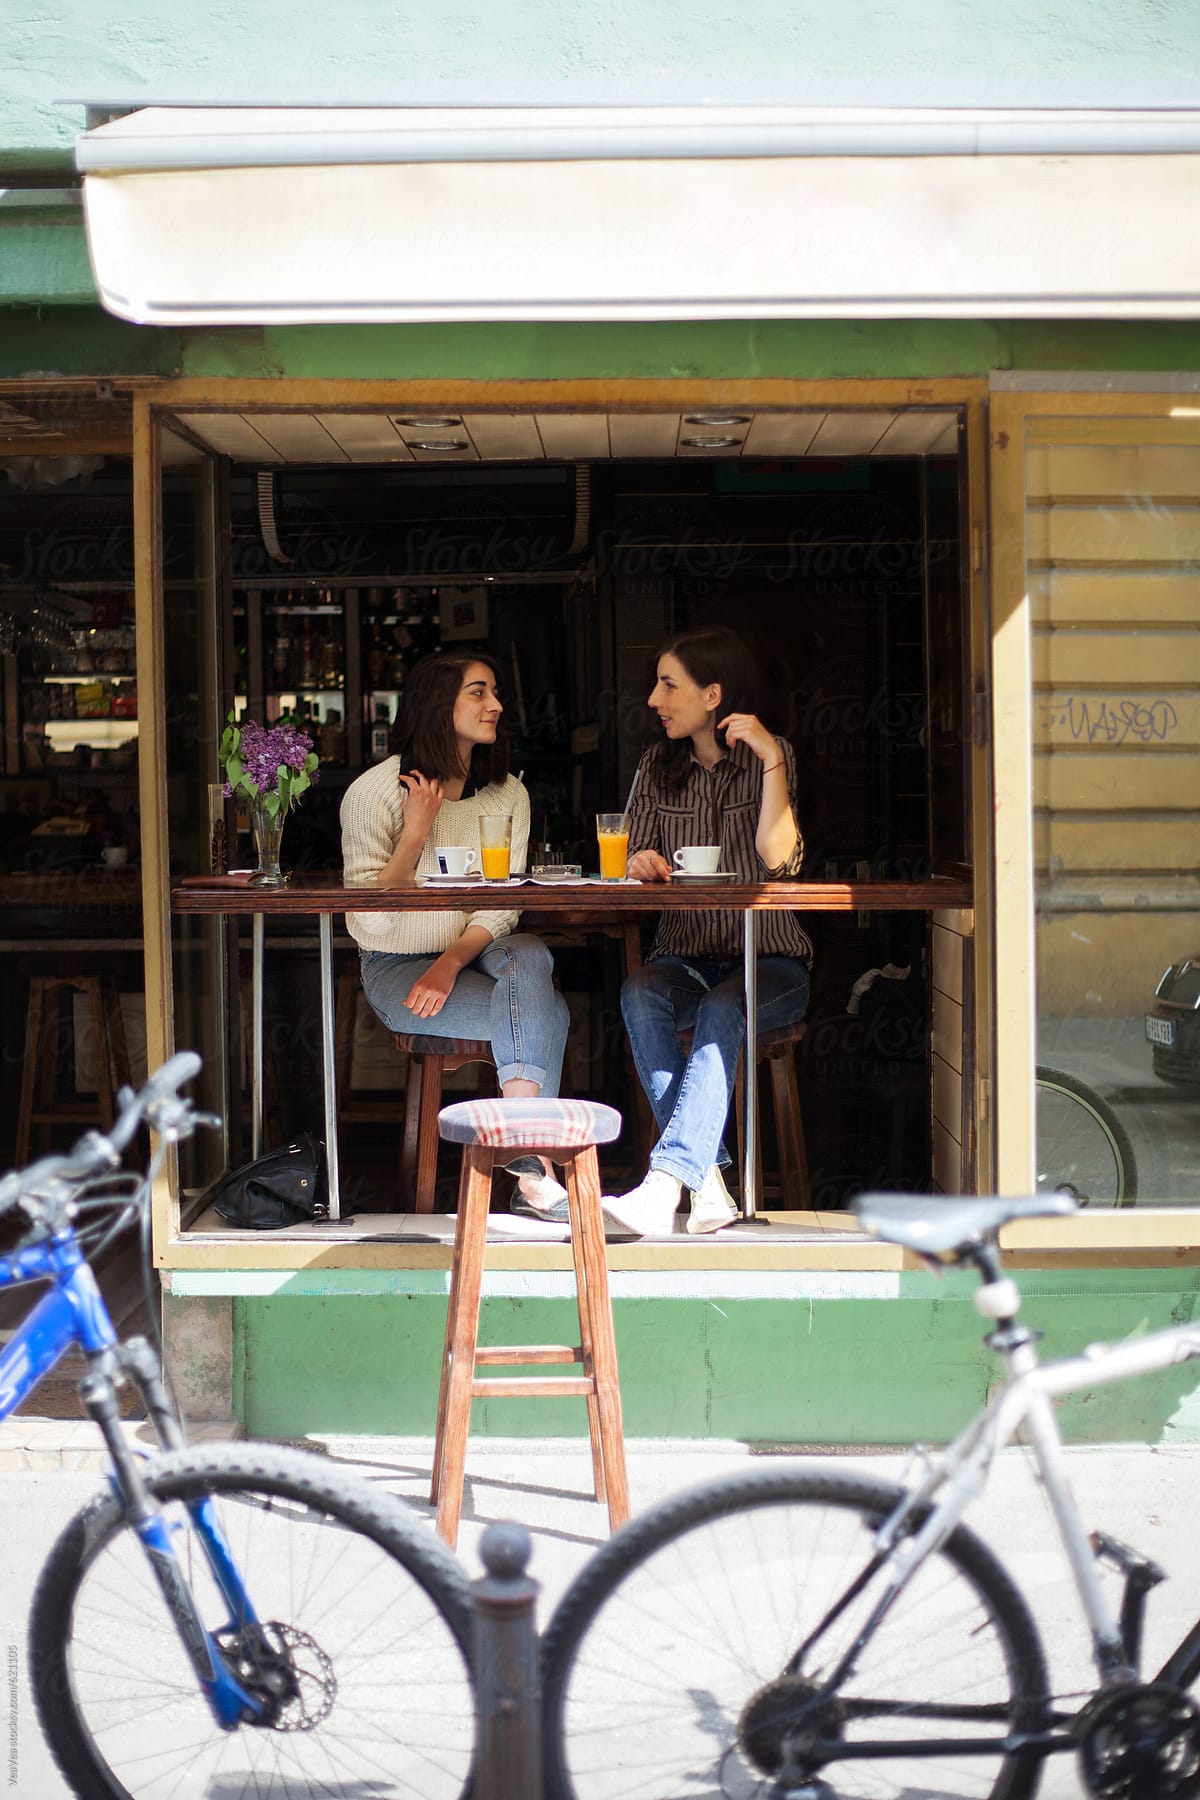 Two woman drinking coffee at the cafe during the sunny day